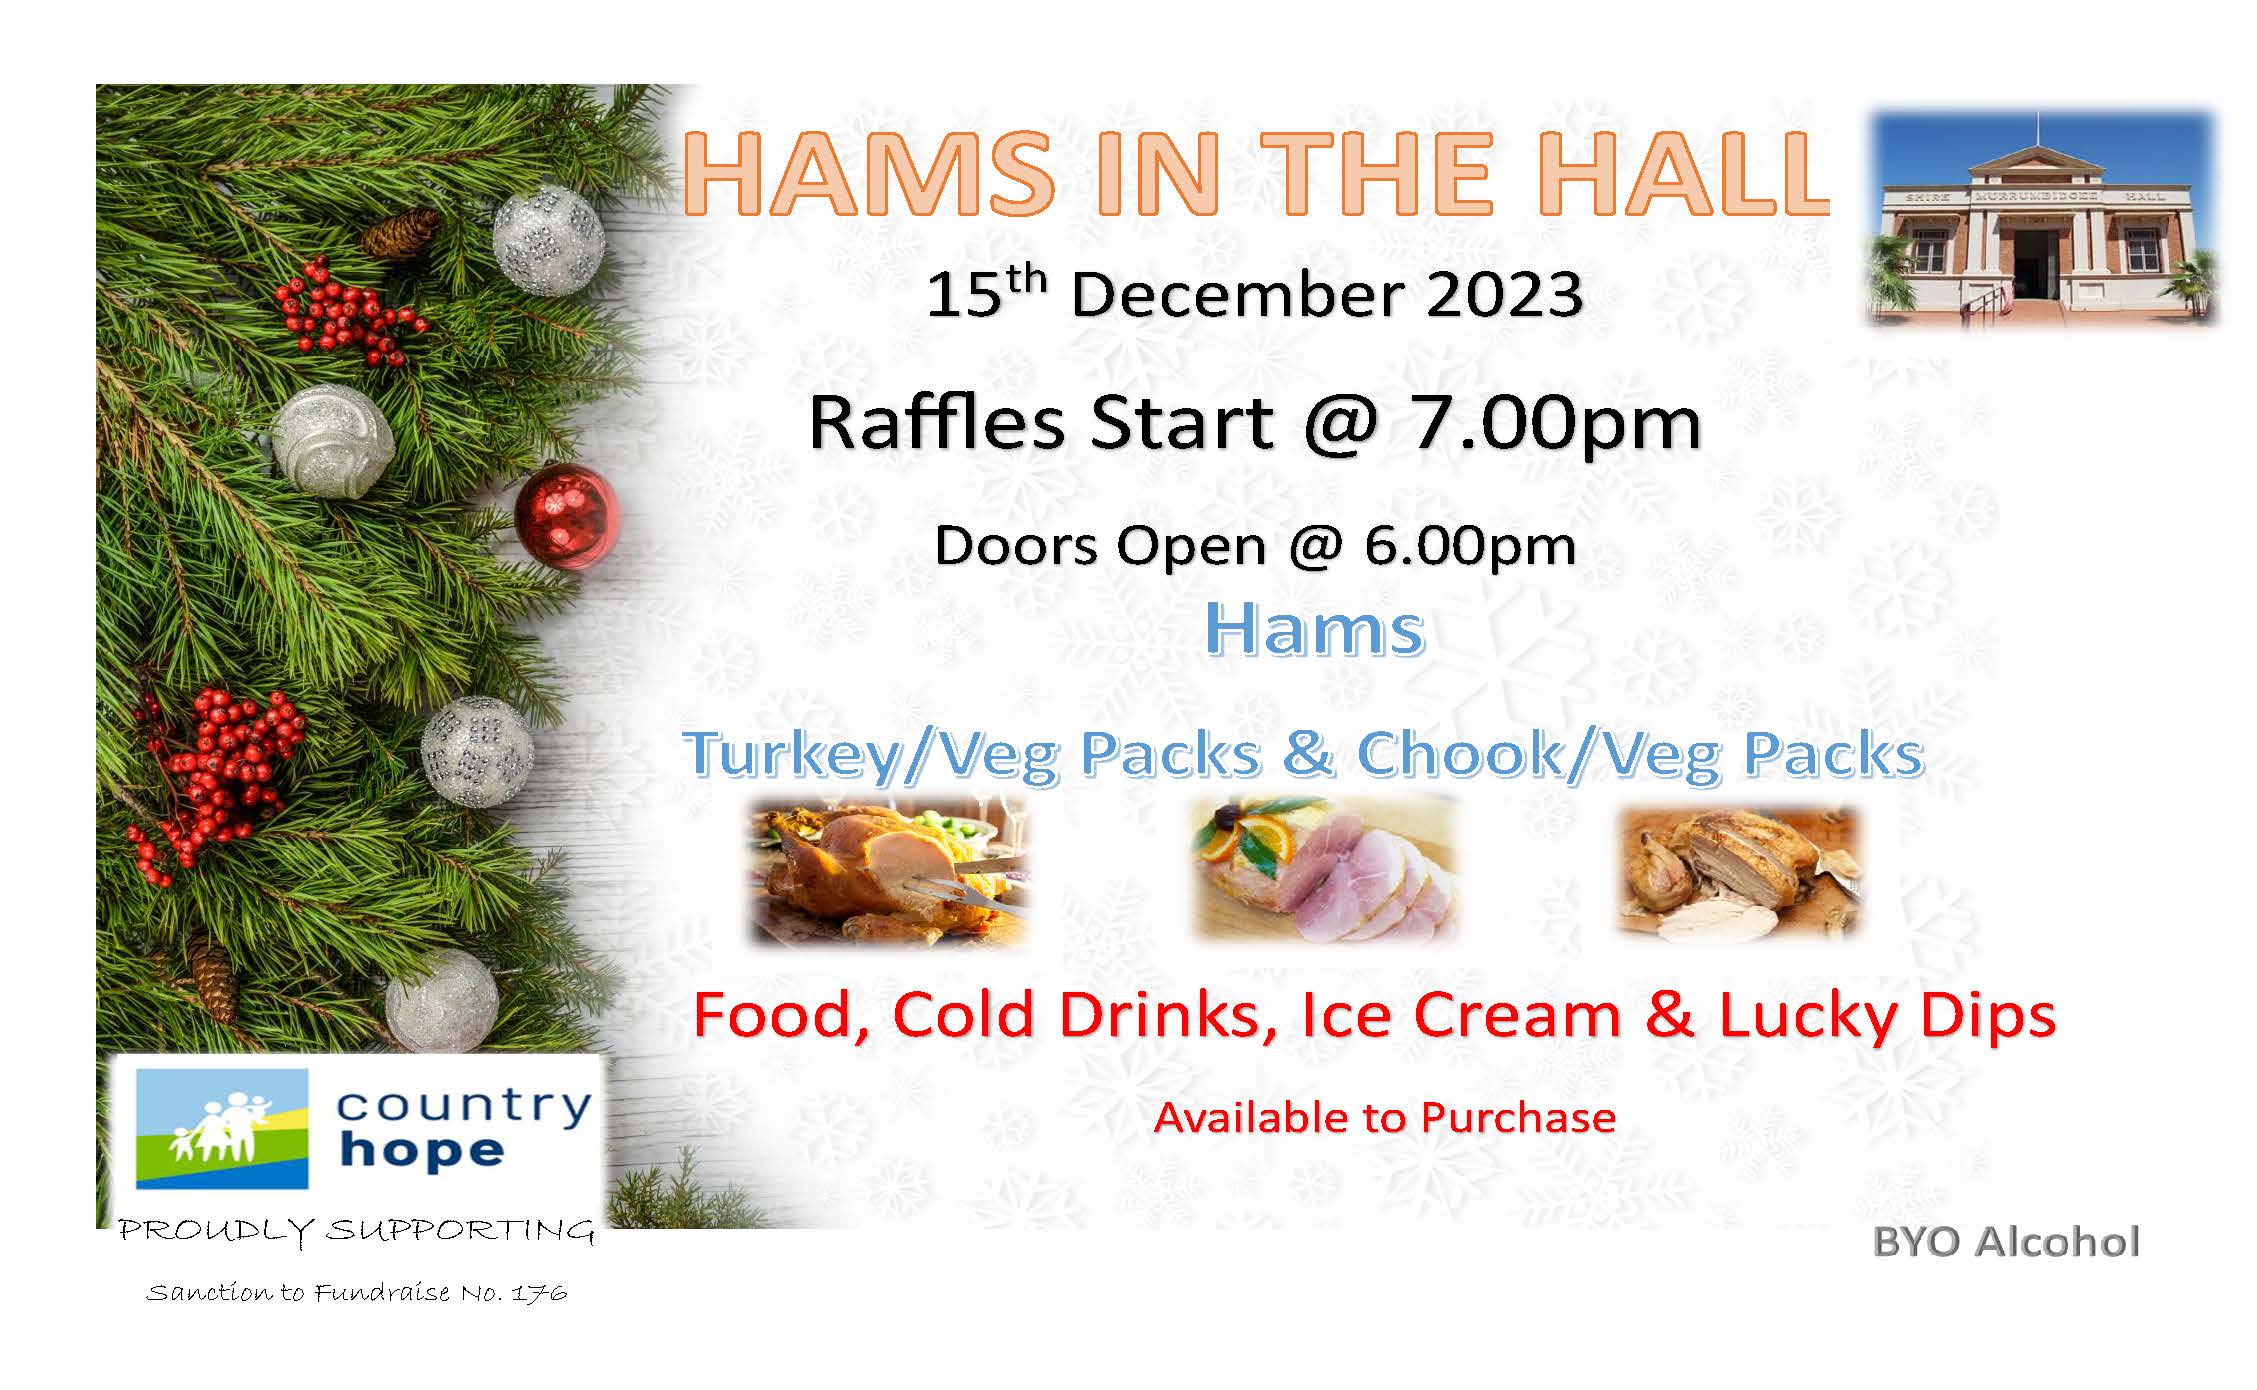 Hams in the Hall